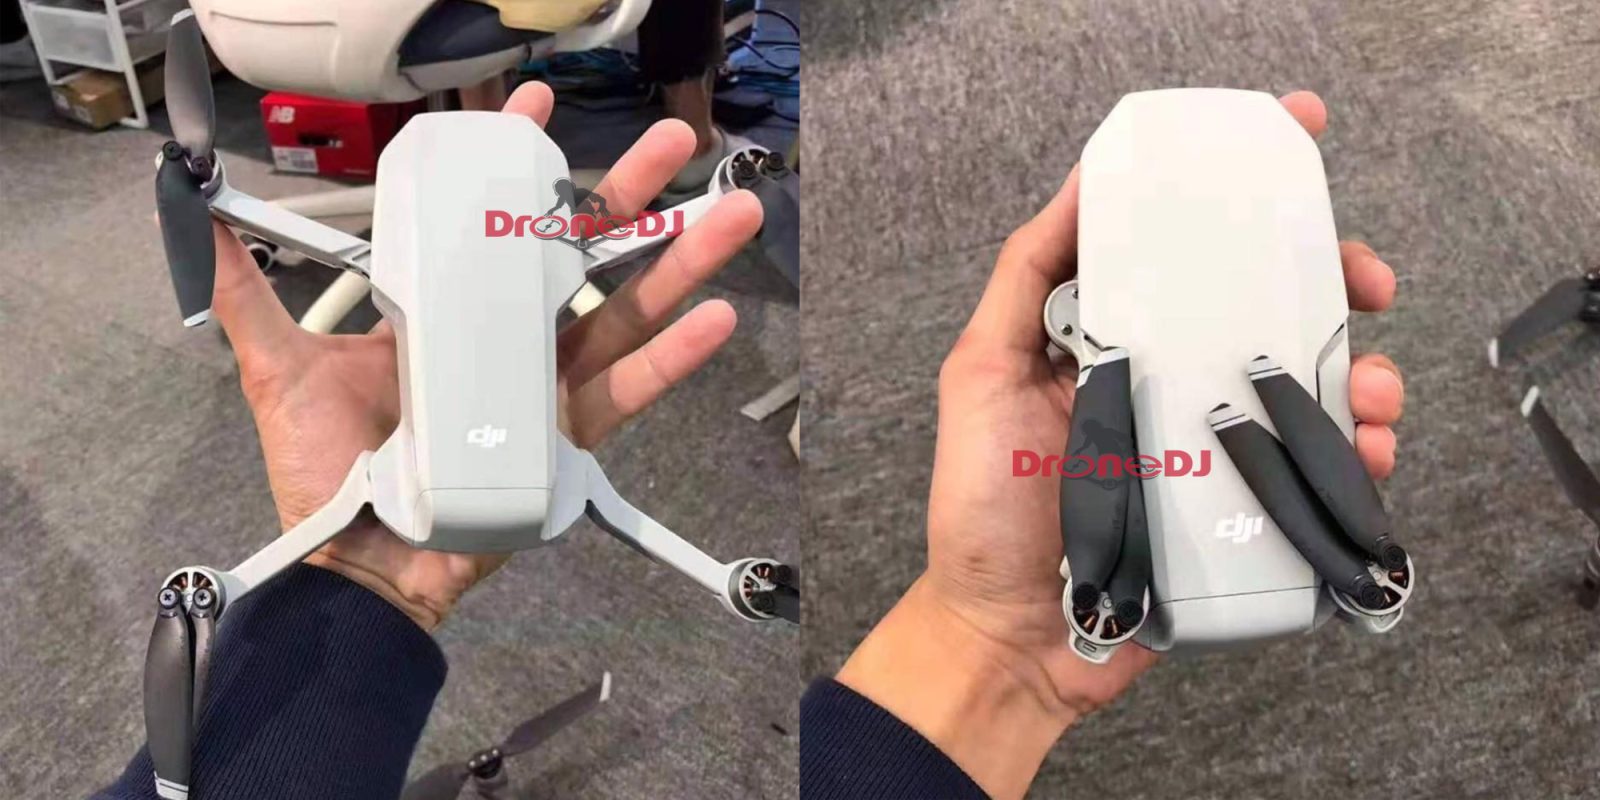 DJI Mavic Mini: new photos and updated specs for palm-sized drone (good and bad)